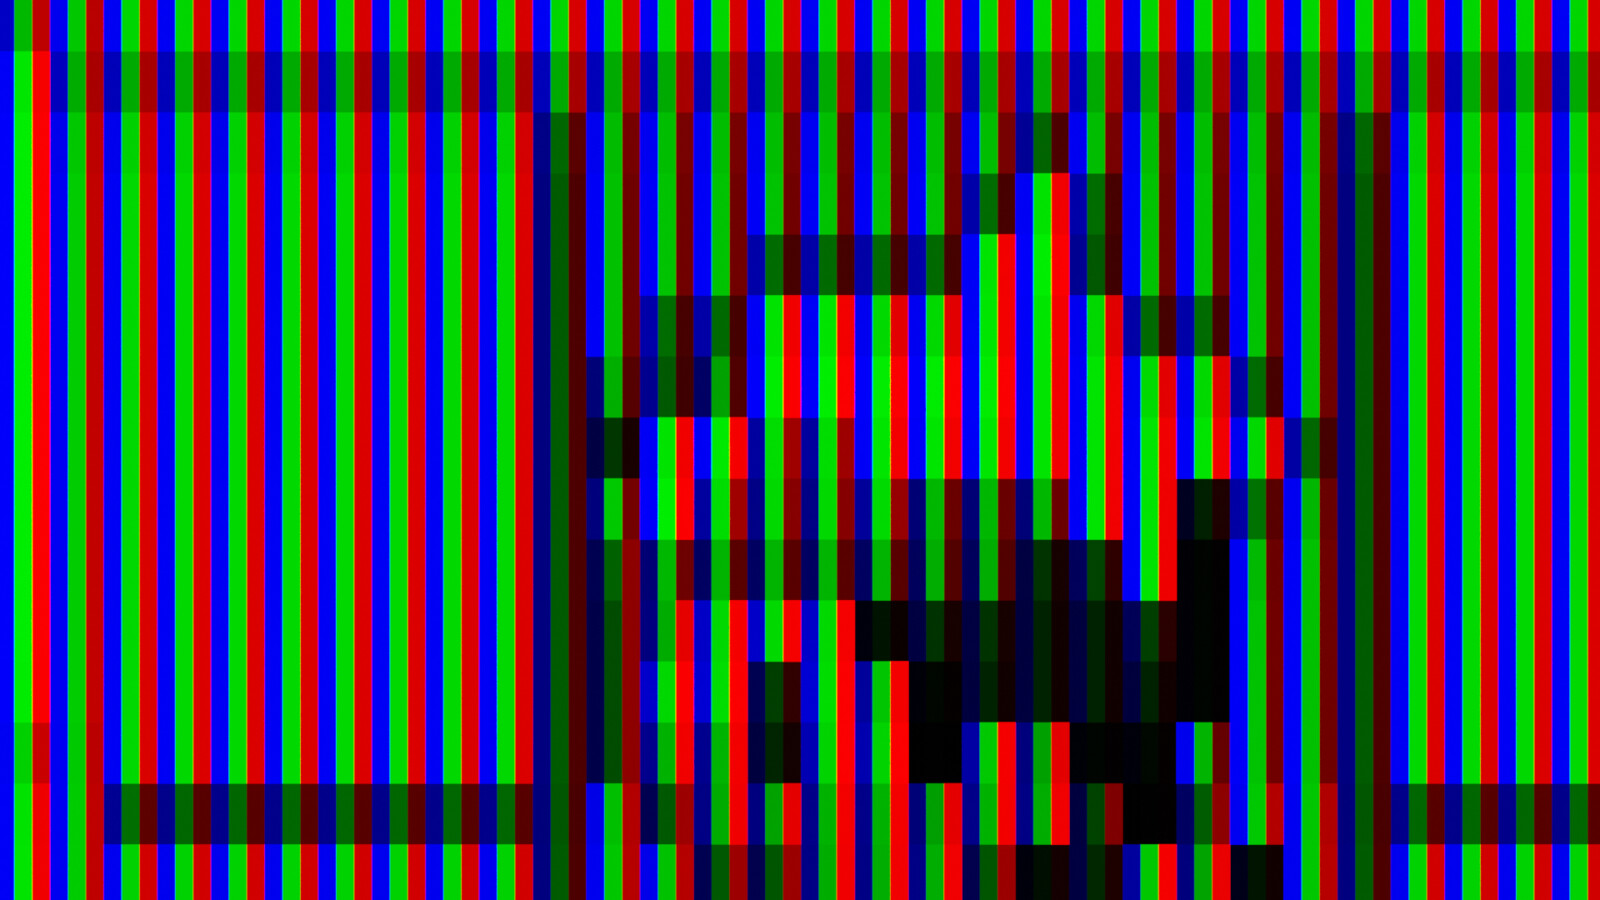 The material nodes for Blender pixelate the vectors for any image/texture, then separate out the red, green, and blue values of each pixel to create a procedural LED screen-like image made up of only those colors.